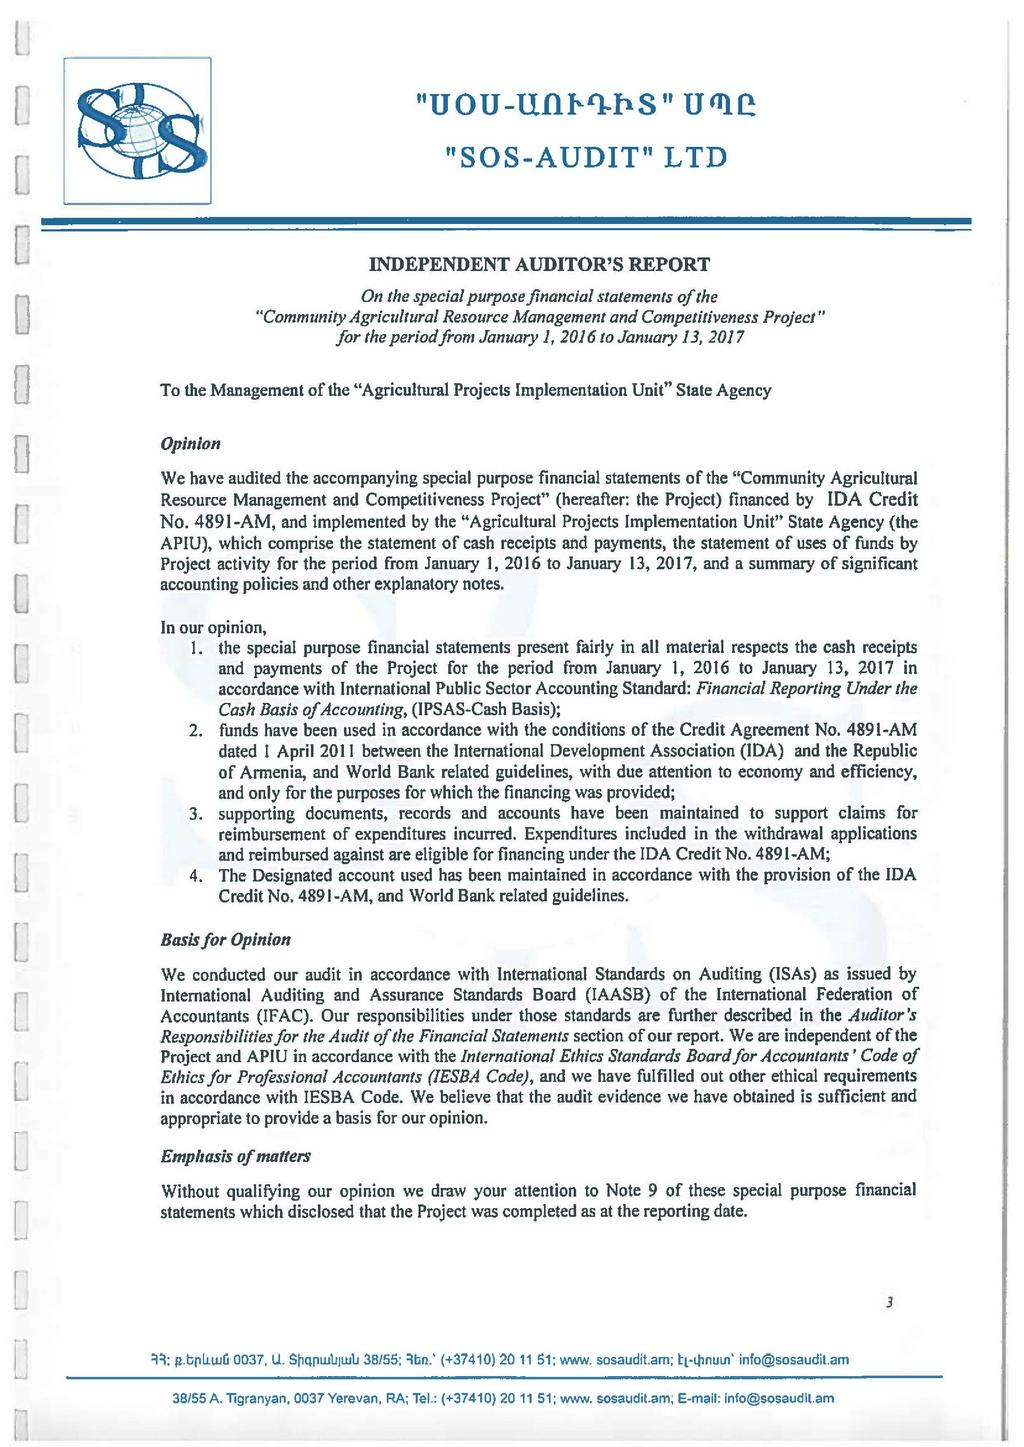 IUOU-fIIIlbI4S" U%Q "SOS-AUDIT" LTD INDEPENDENT AUDITOR'S REPORT On the special purpose financial statements ofthe "Community Agricultural Resource Management and Competitiveness Project" for the